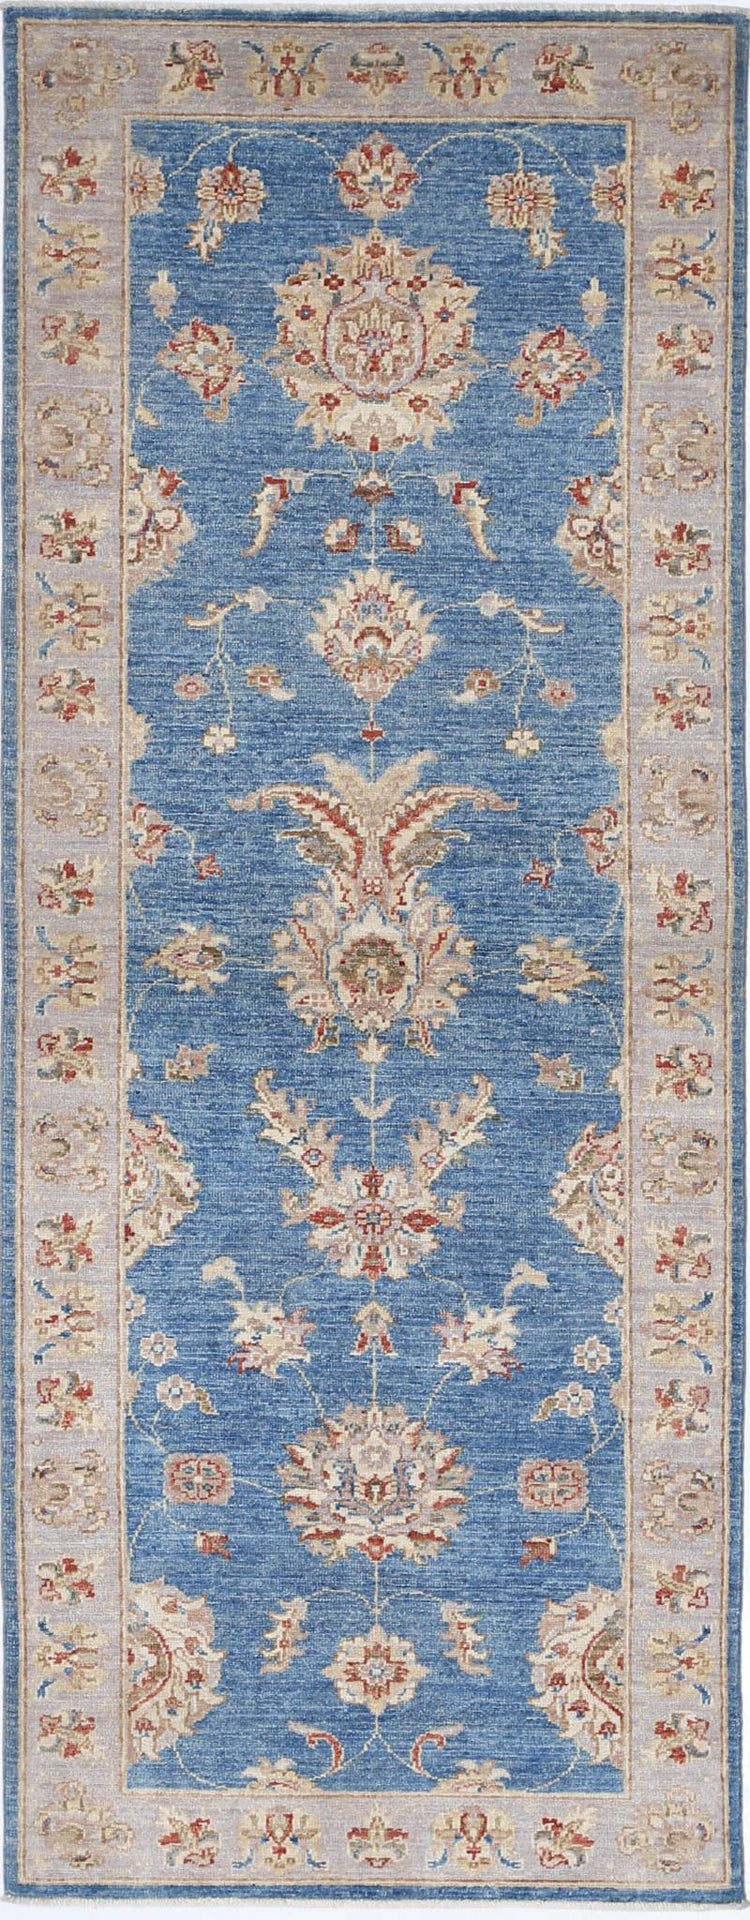 Traditional Hand Knotted Ziegler Farhan Wool Rug of Size 2'6'' X 7'0'' in Blue and Grey Colors - Made in Afghanistan